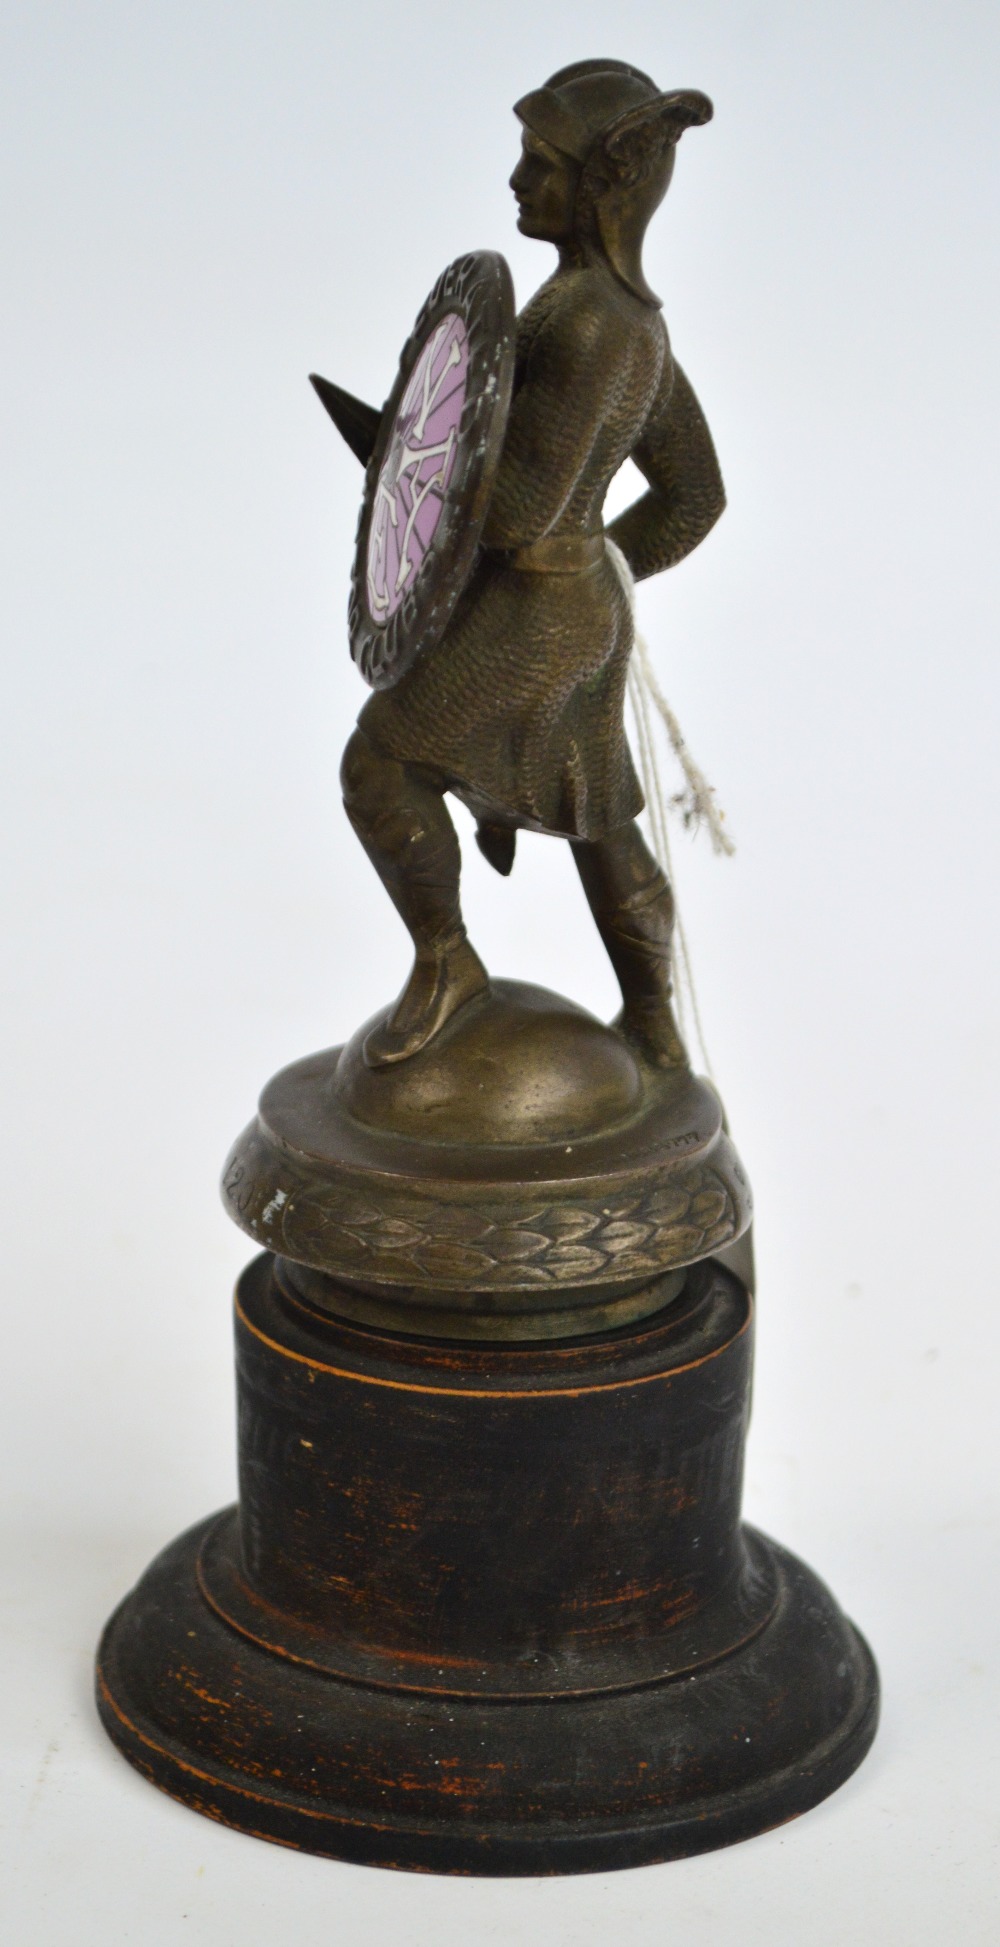 A rare early 1920s North Eastern Automobile Association "Guardian" car mascot, - Image 3 of 6